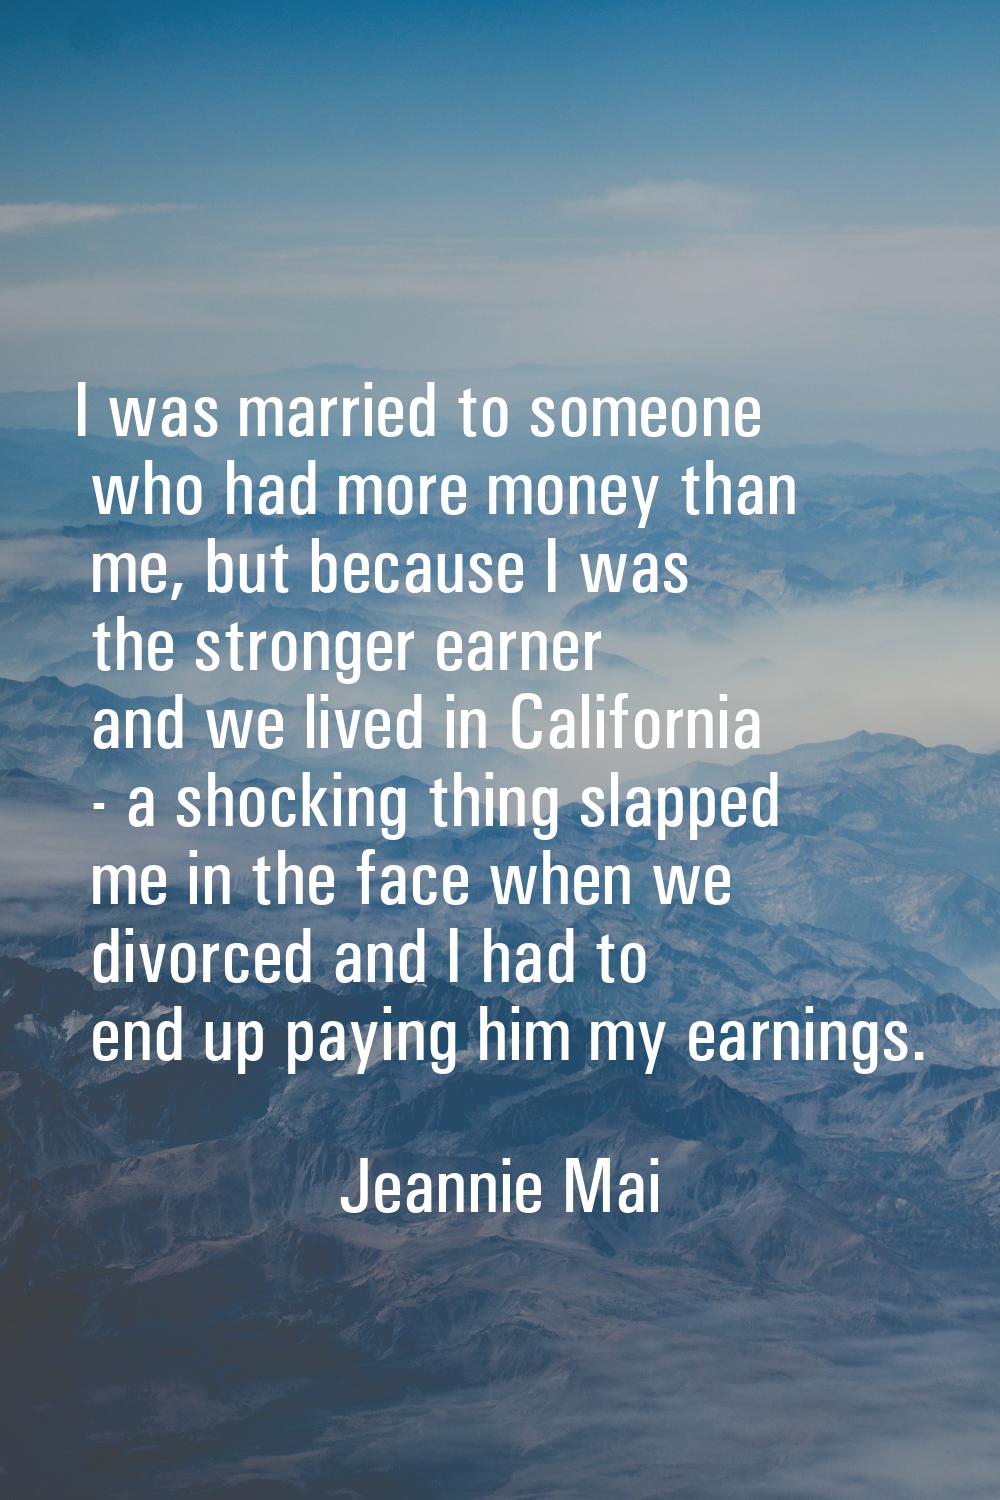 I was married to someone who had more money than me, but because I was the stronger earner and we l